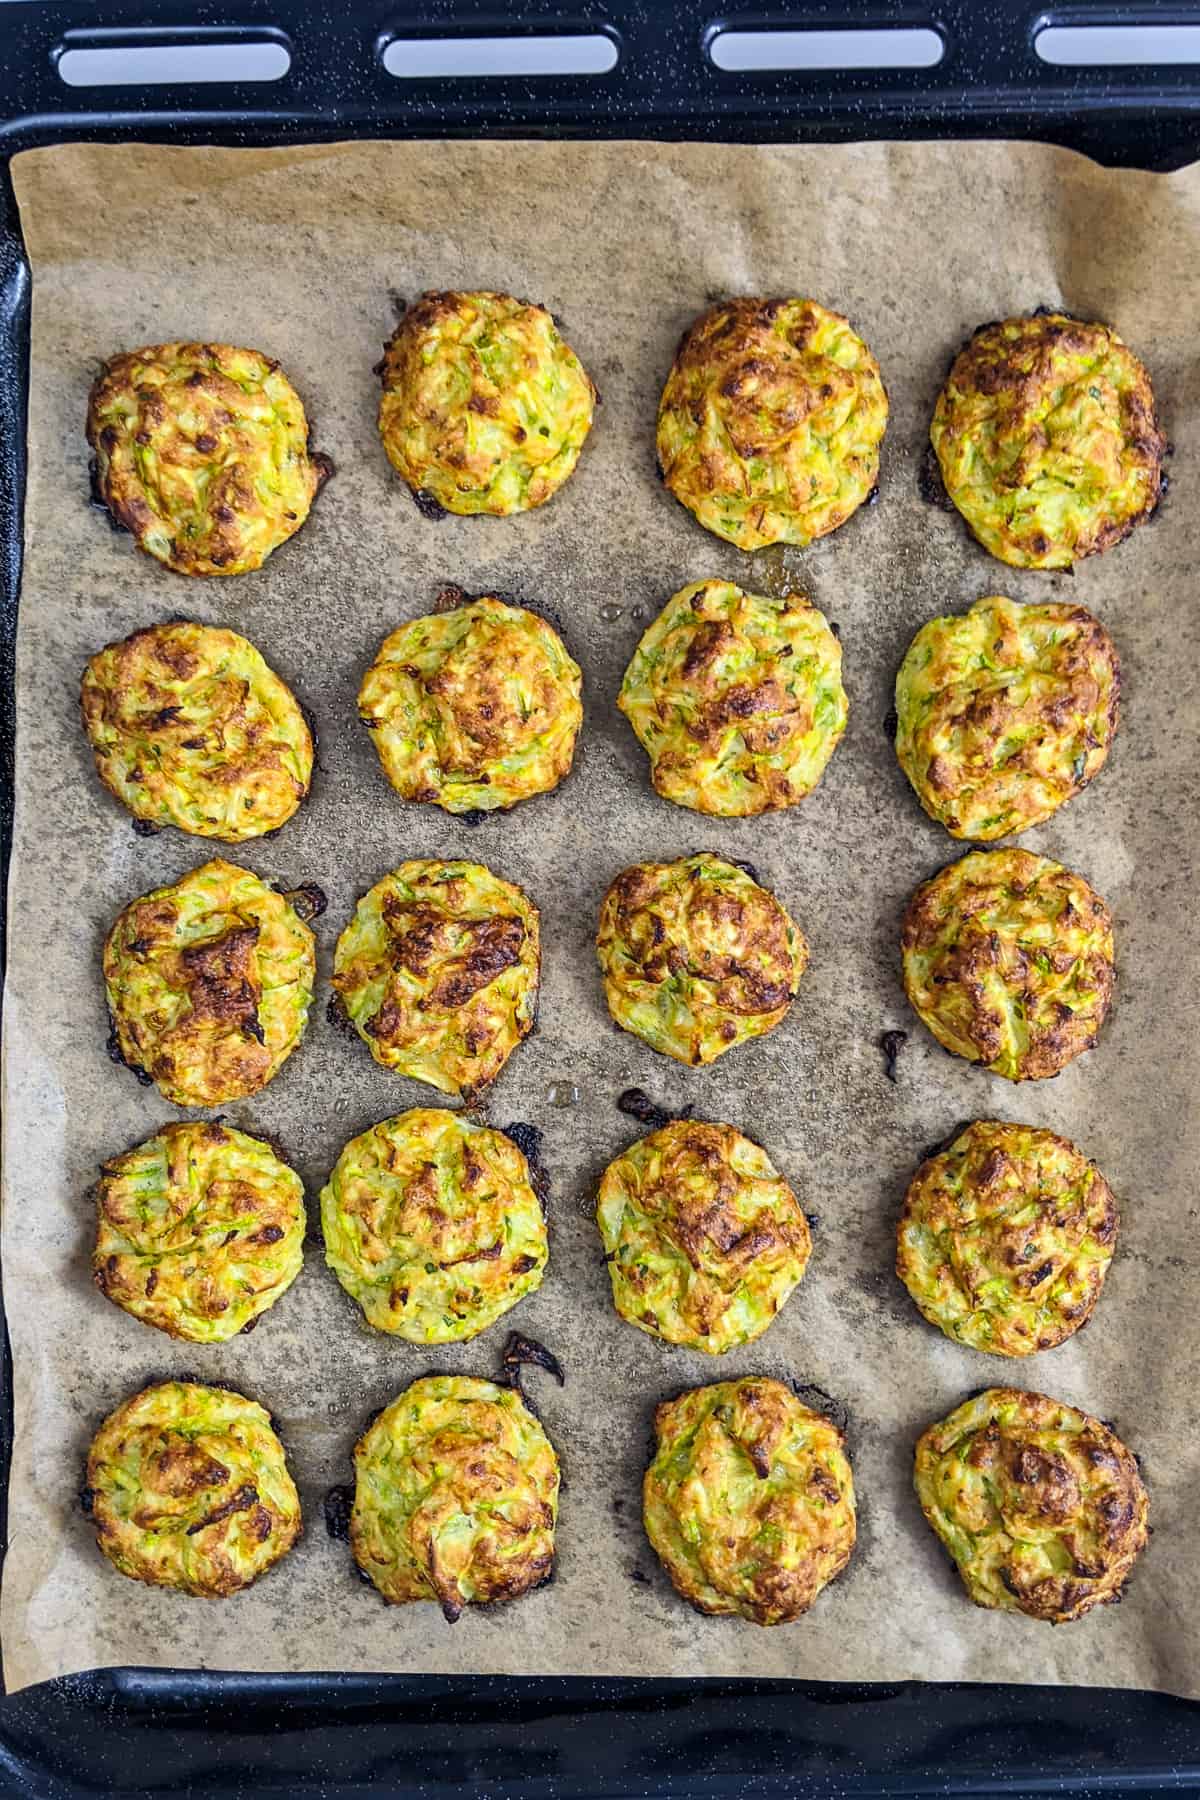 Cooked zucchini garlic bites on a baking tray covered with baking paper.